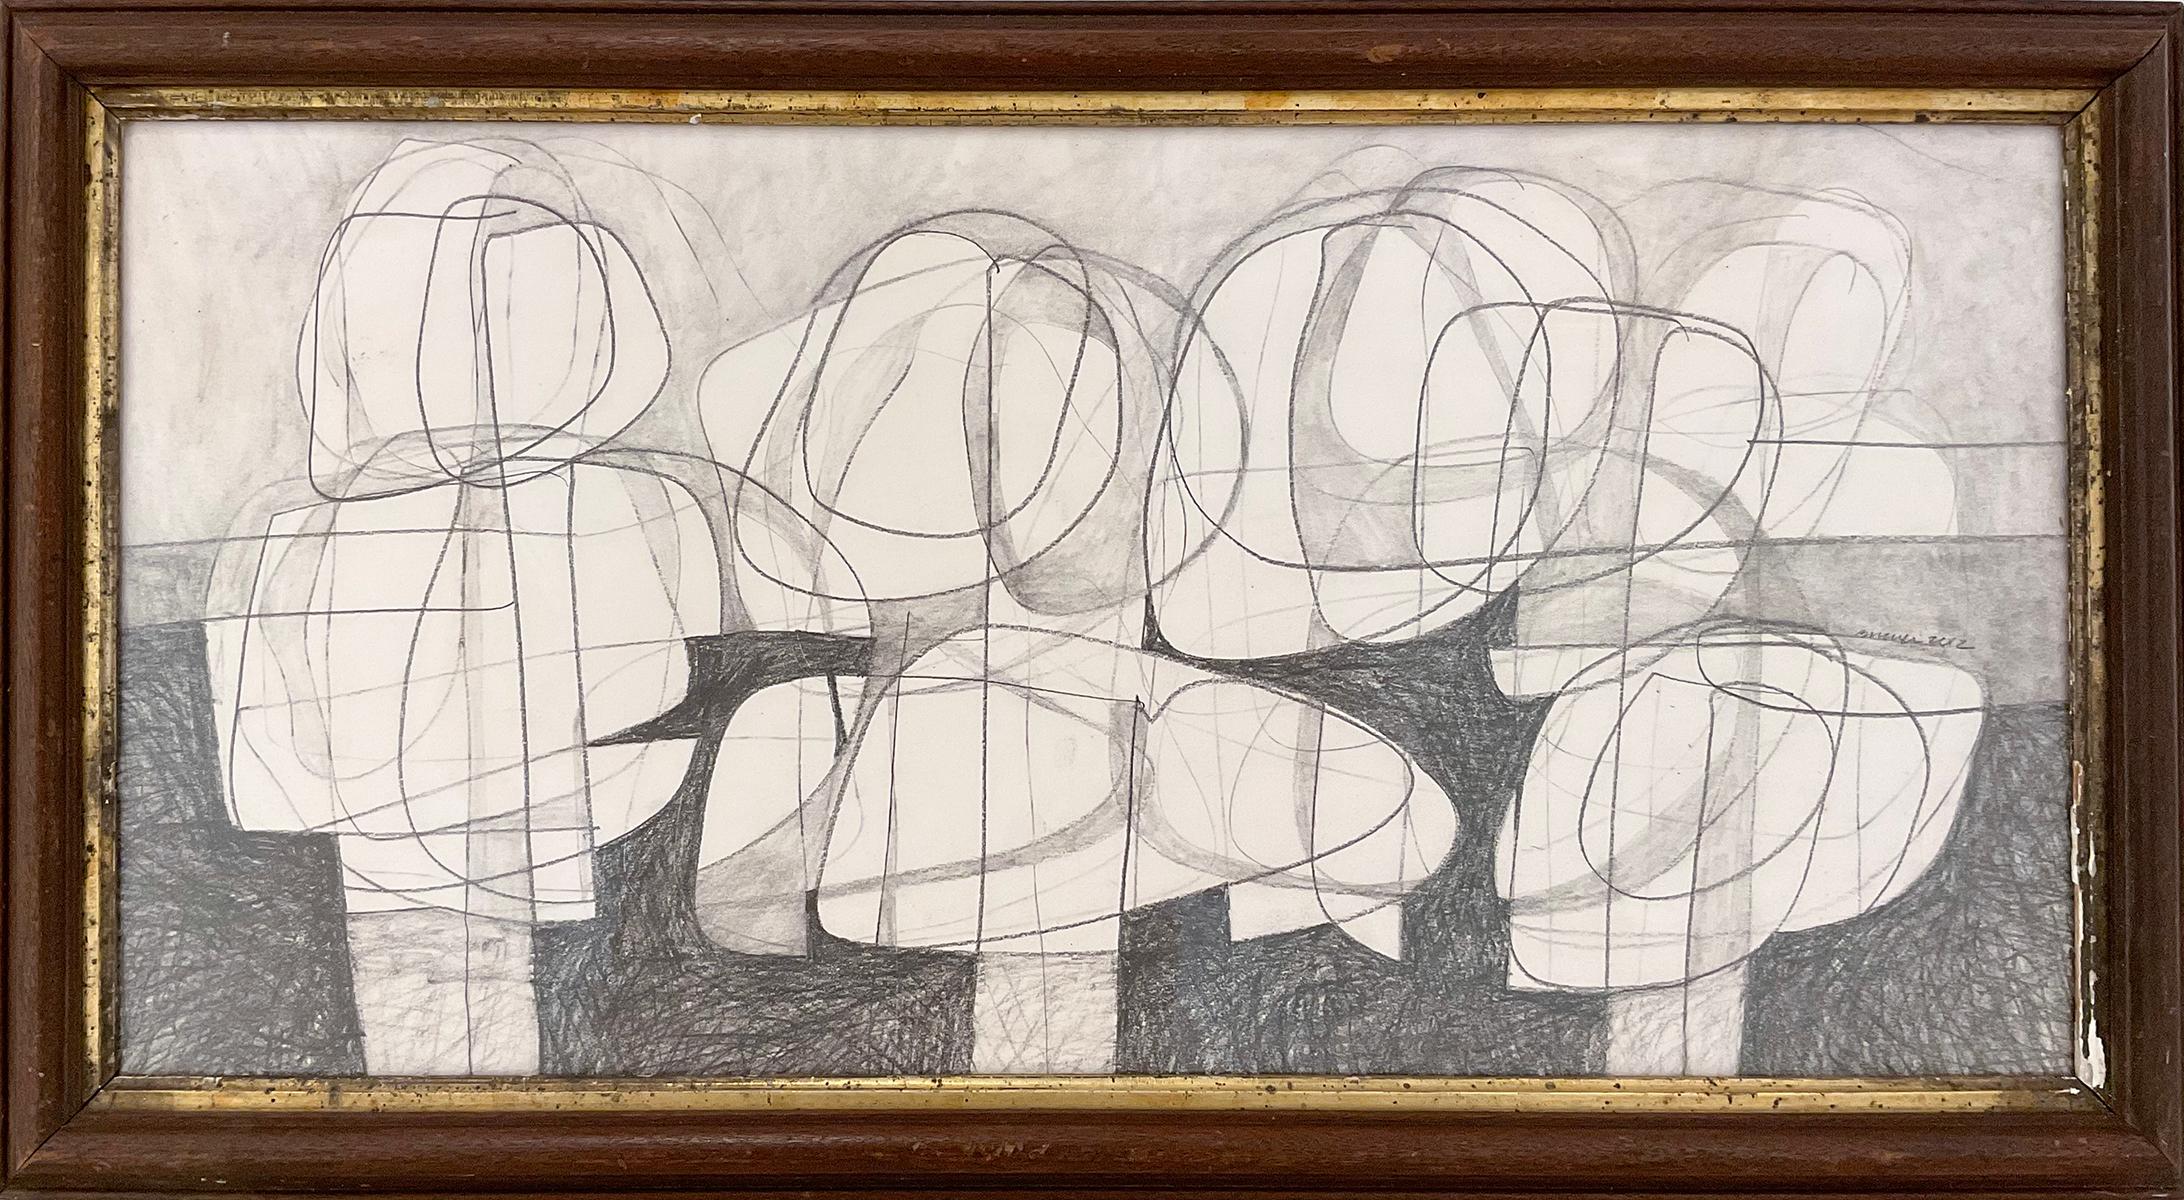 David Dew Bruner Figurative Art - Sutherland Project III: Figurative Abstract Graphite Drawing w/ Antique Frame 